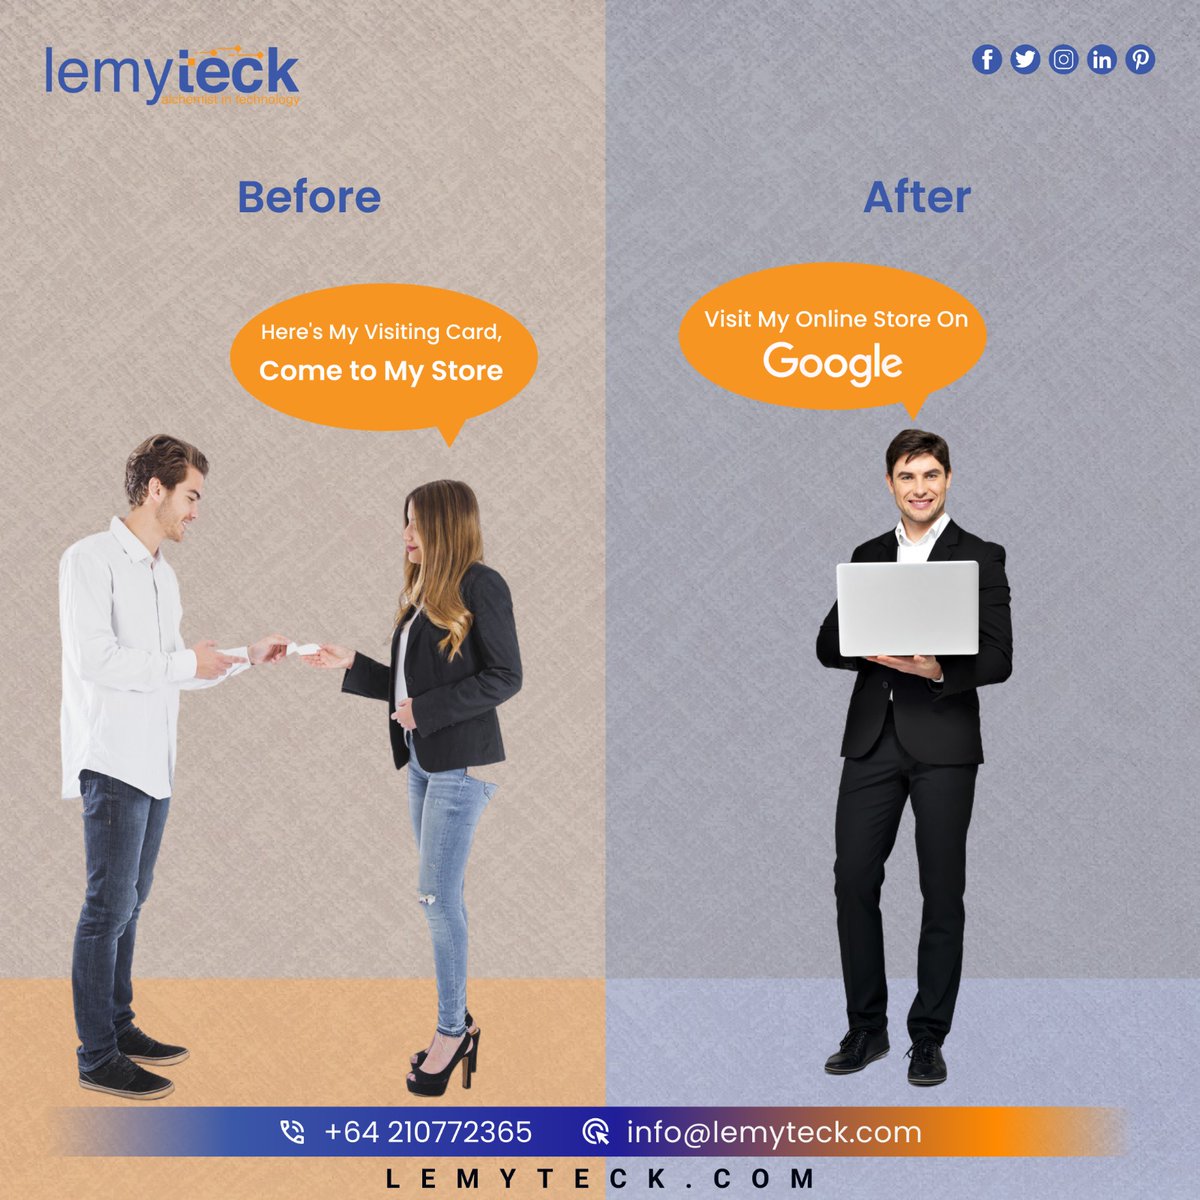 Transform your shopping journey from physical to digital convenience. Explore our wide range of products with just a few clicks. Embrace the future of retail as you shop from home. #lemyteck #DigitalAuckland #DigitalShopping #OnlineShopping #ShopOnline